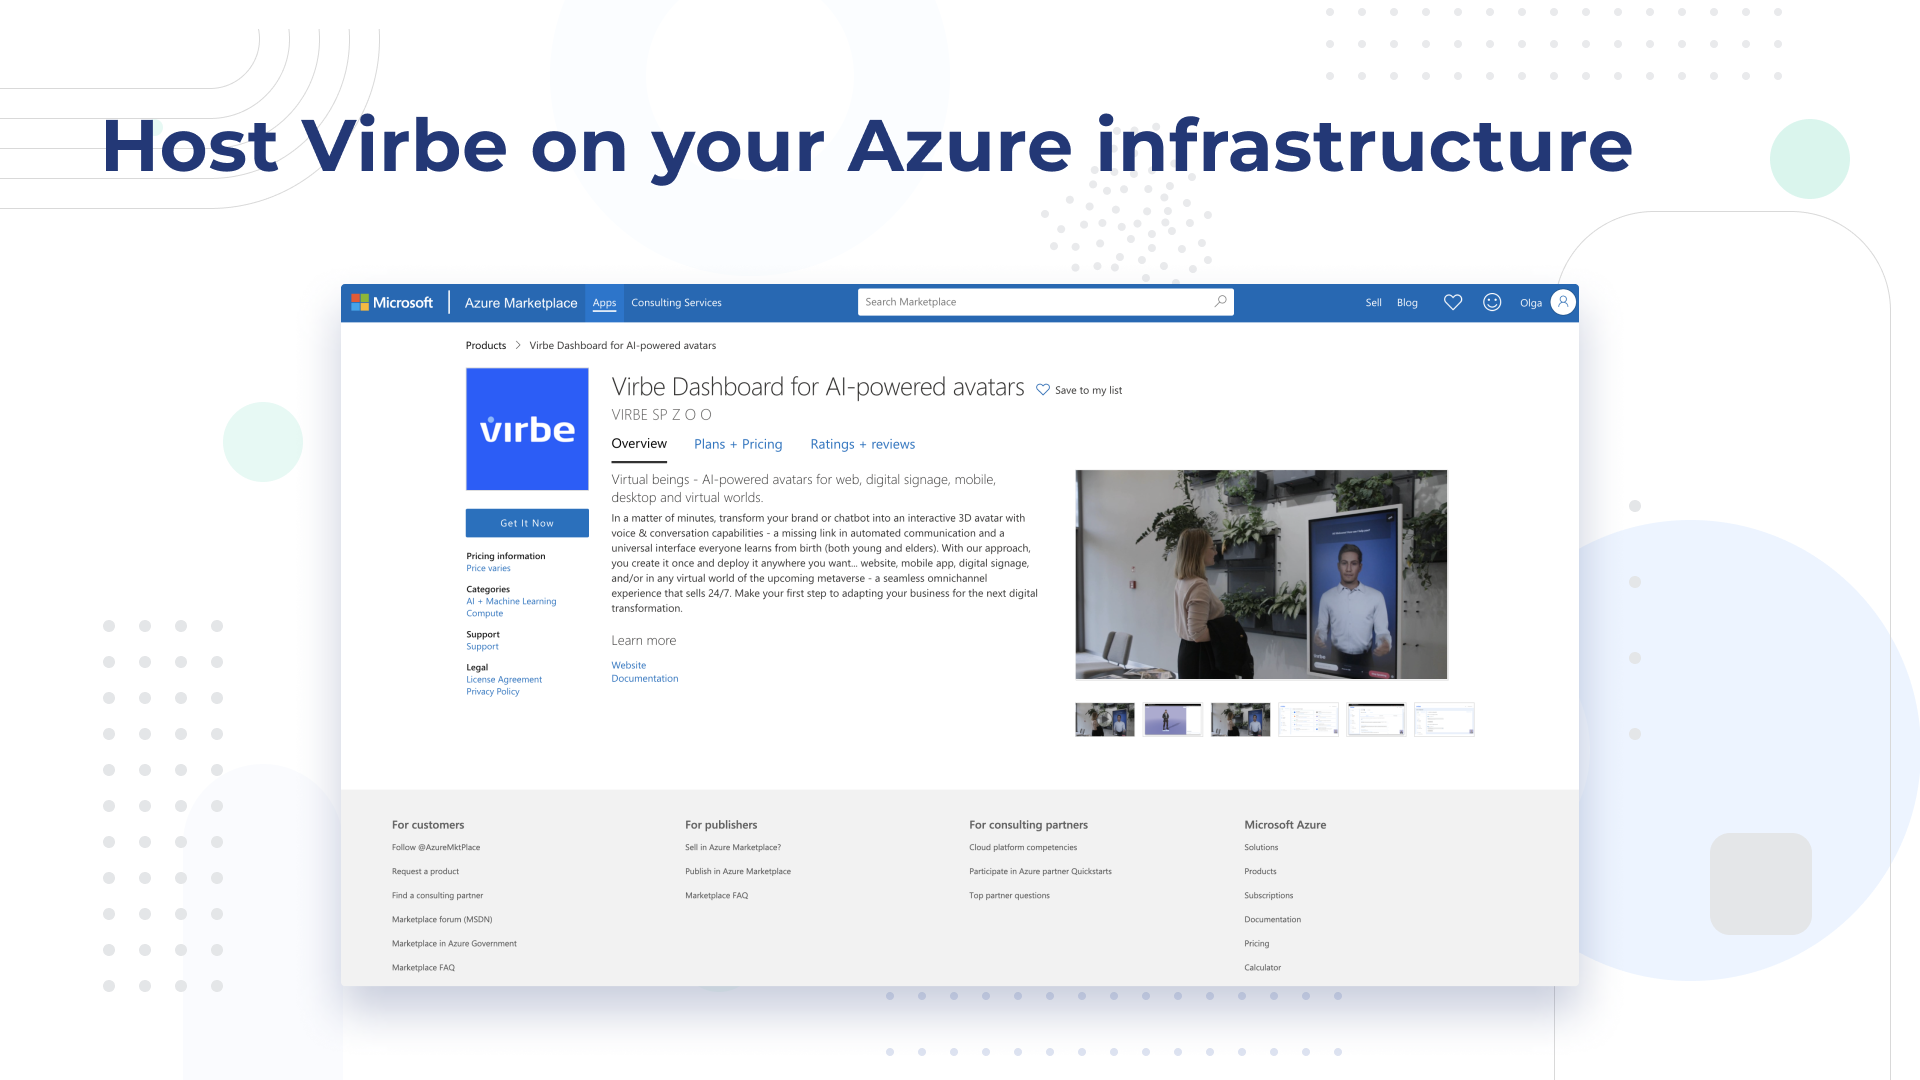 How to host Virbe on your Azure infrastructure